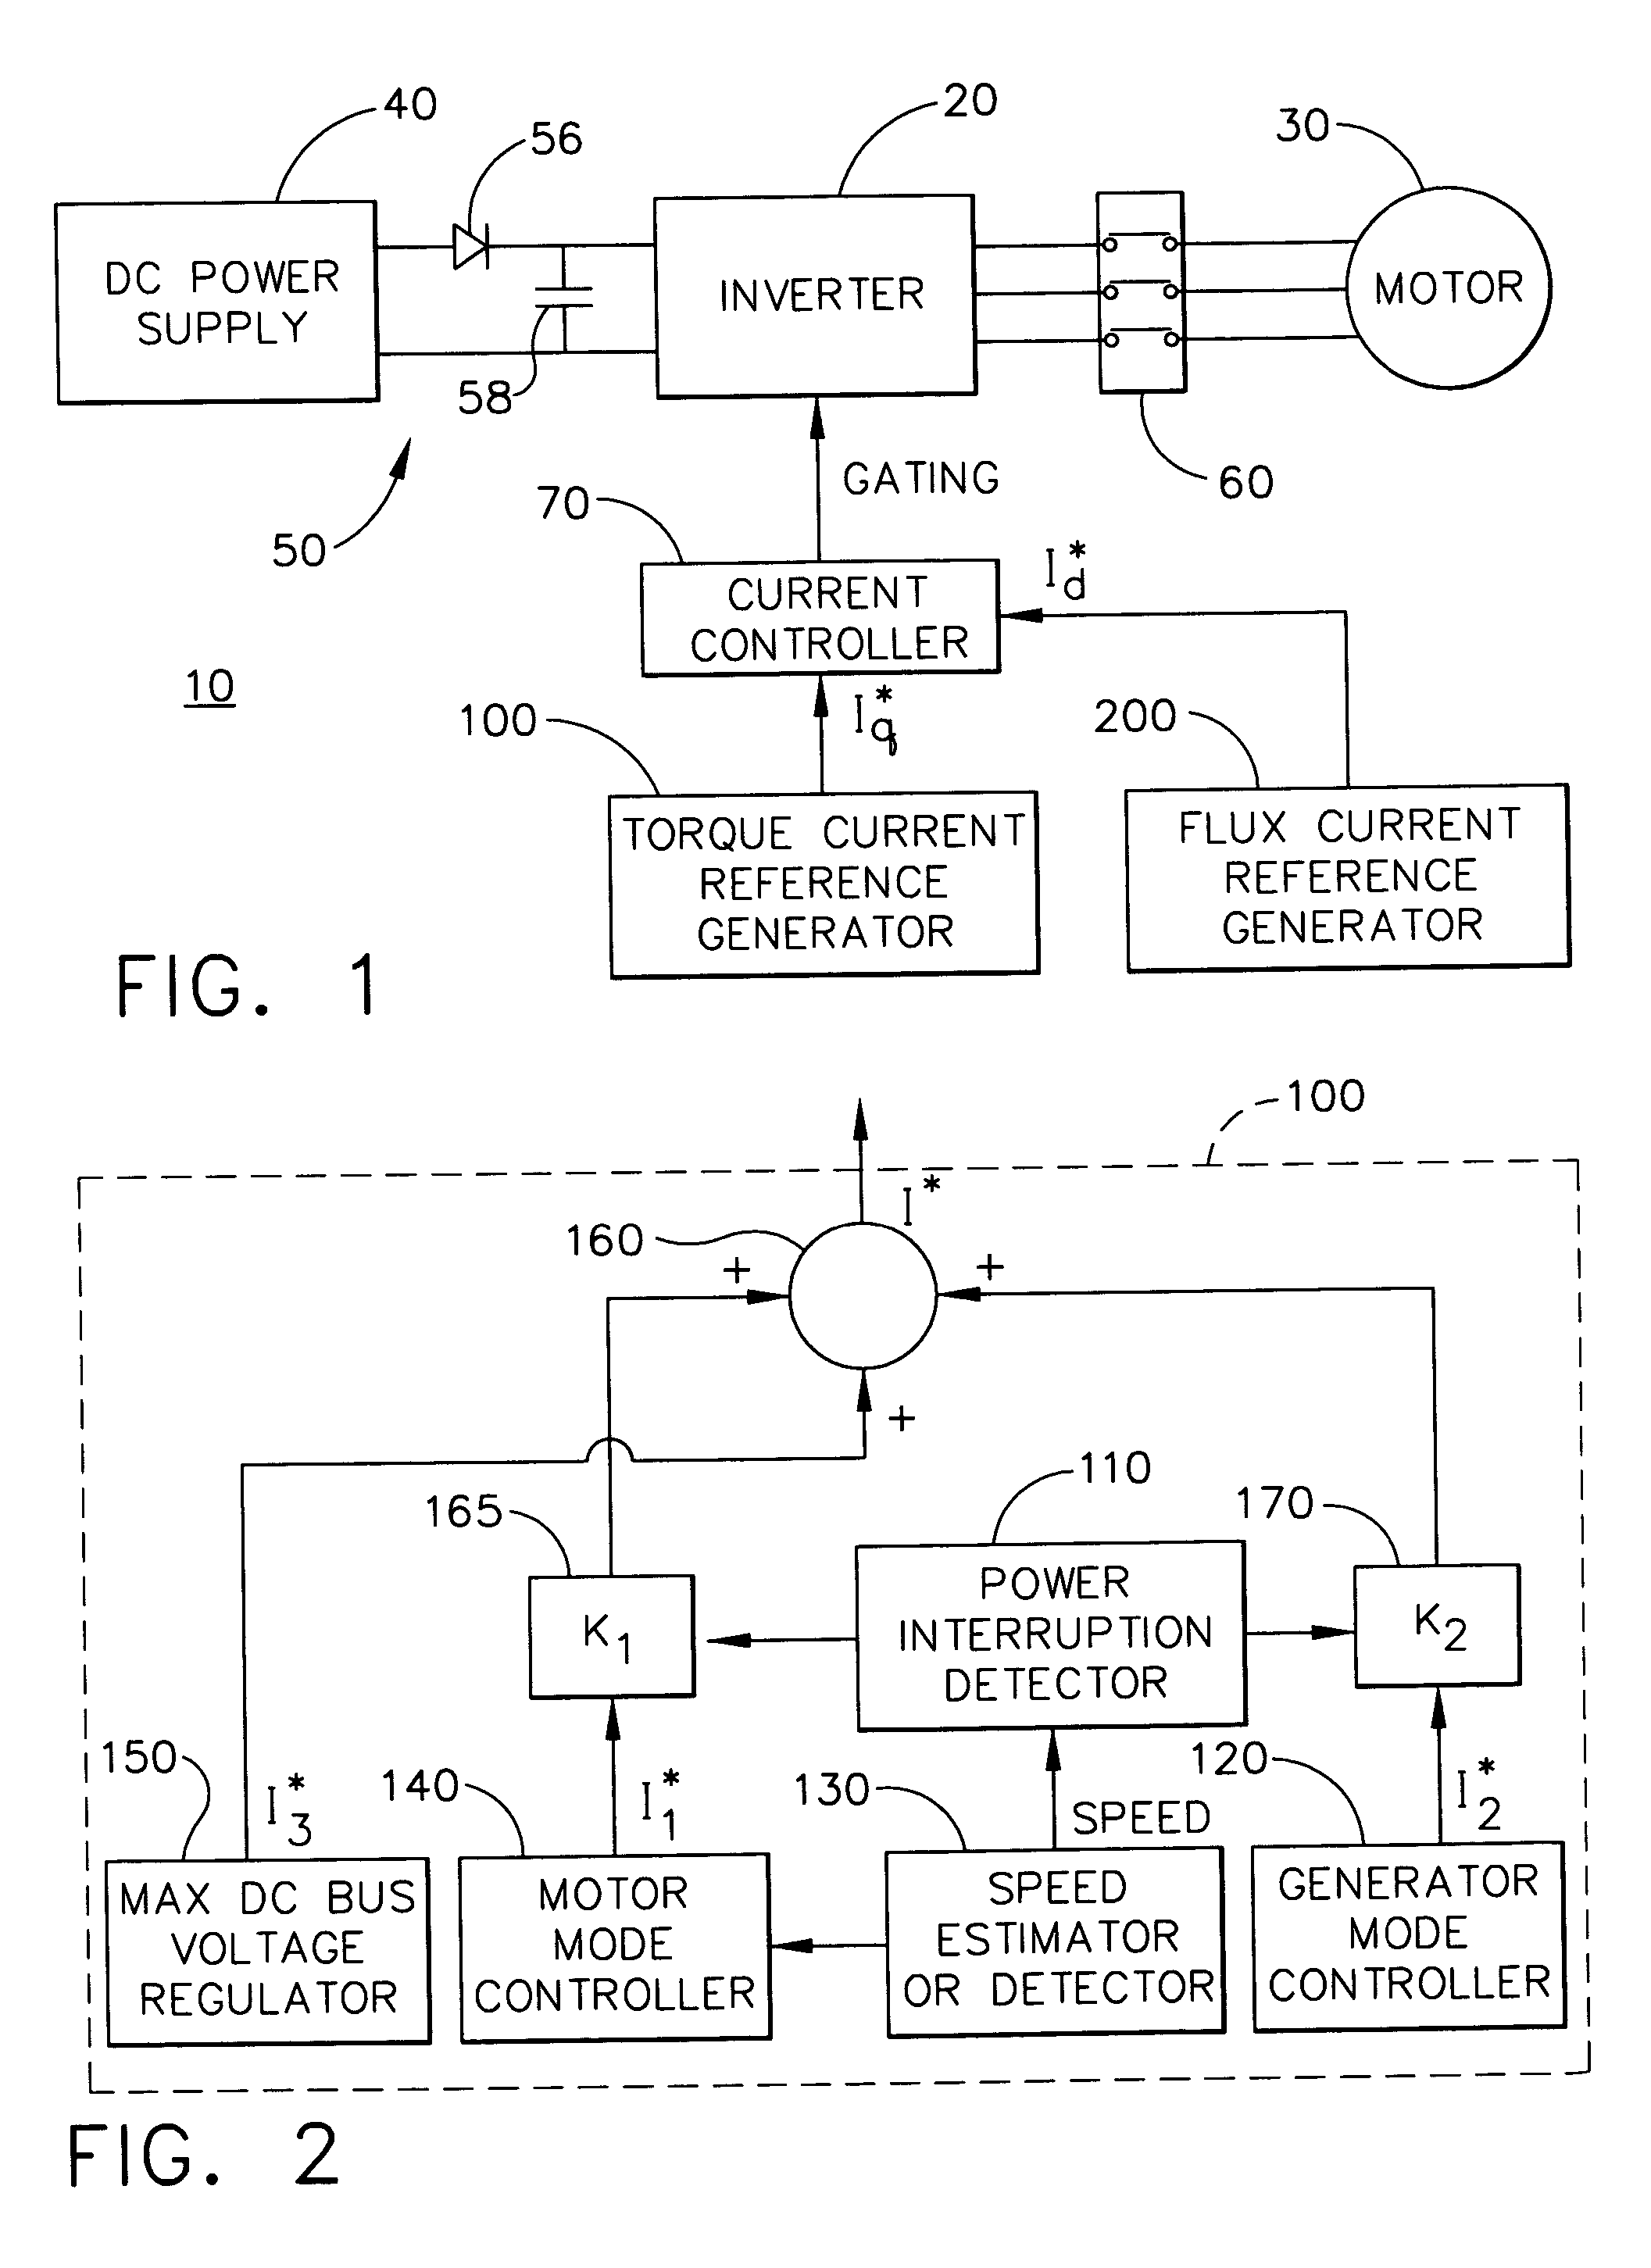 Power converter controlling apparatus and method providing ride through capability during power interruption in a motor drive system